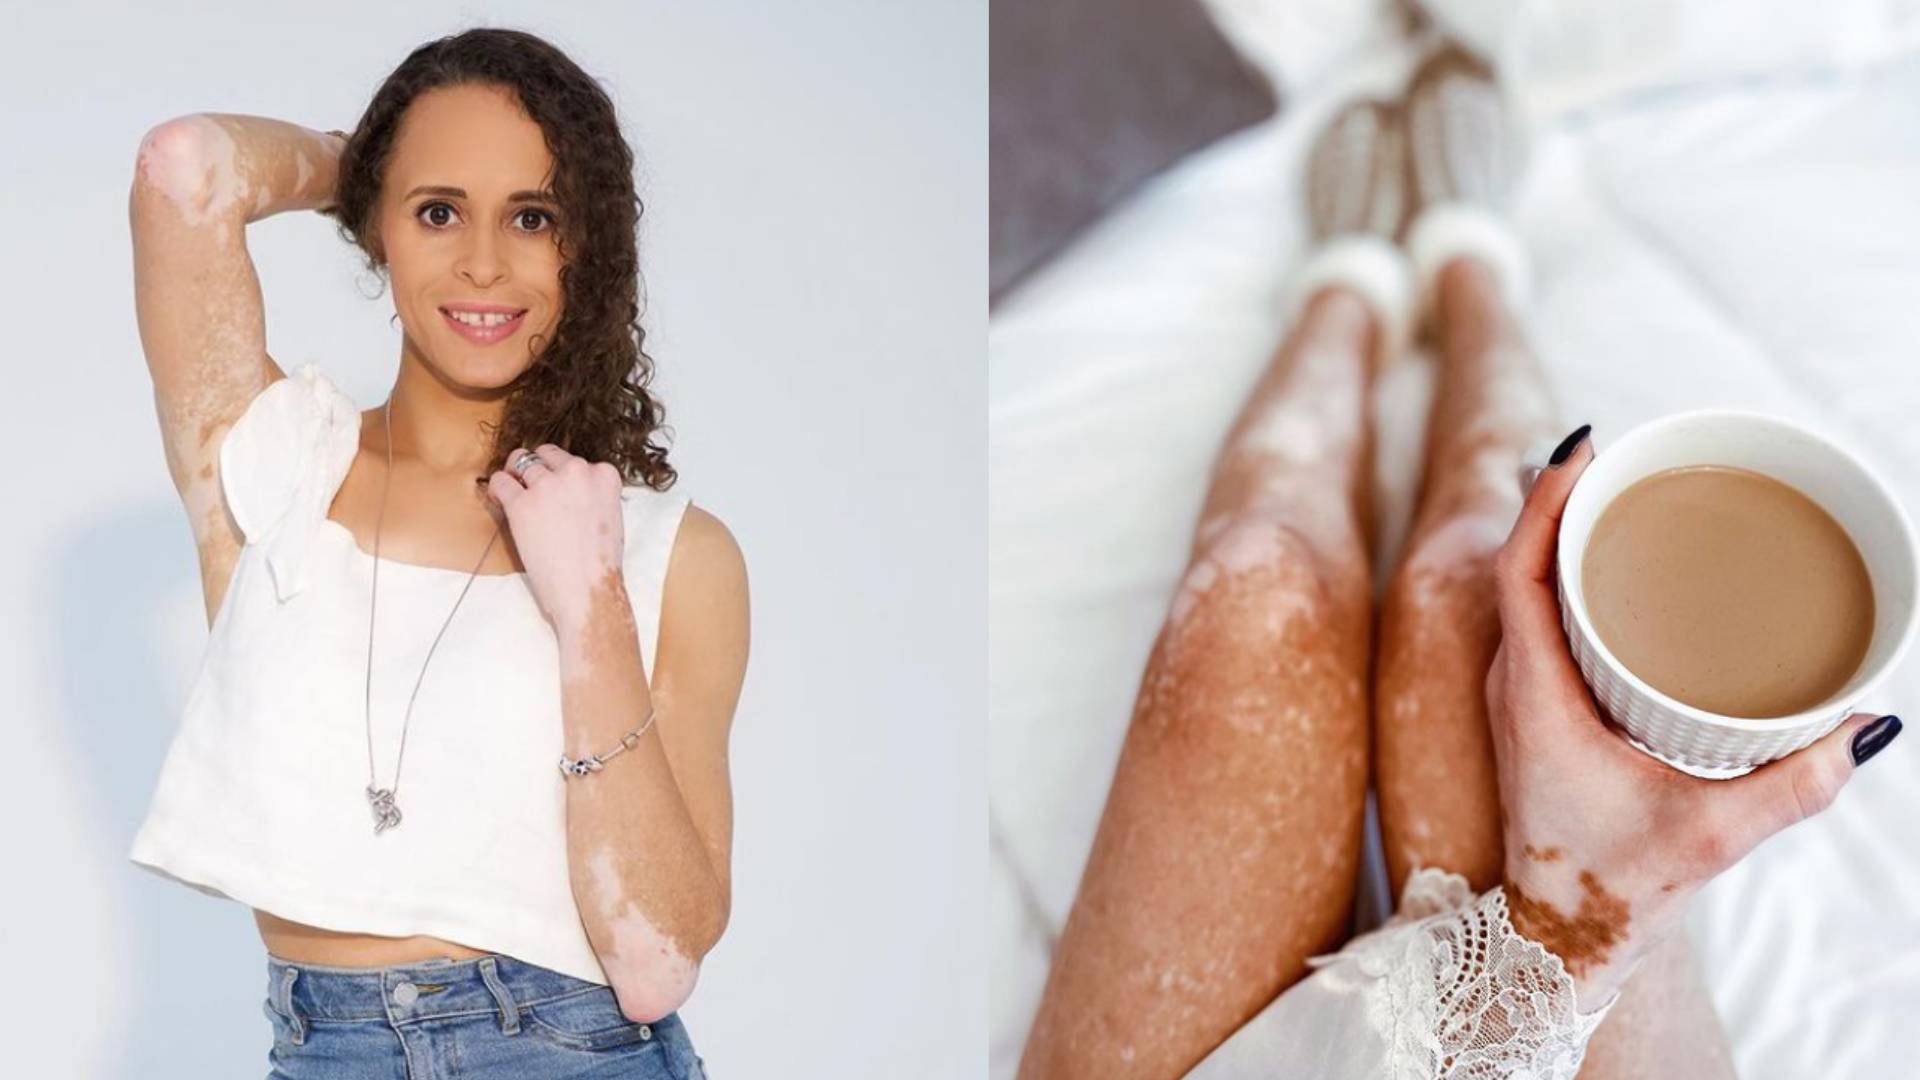 Natalie has vitiligo covering much of her body